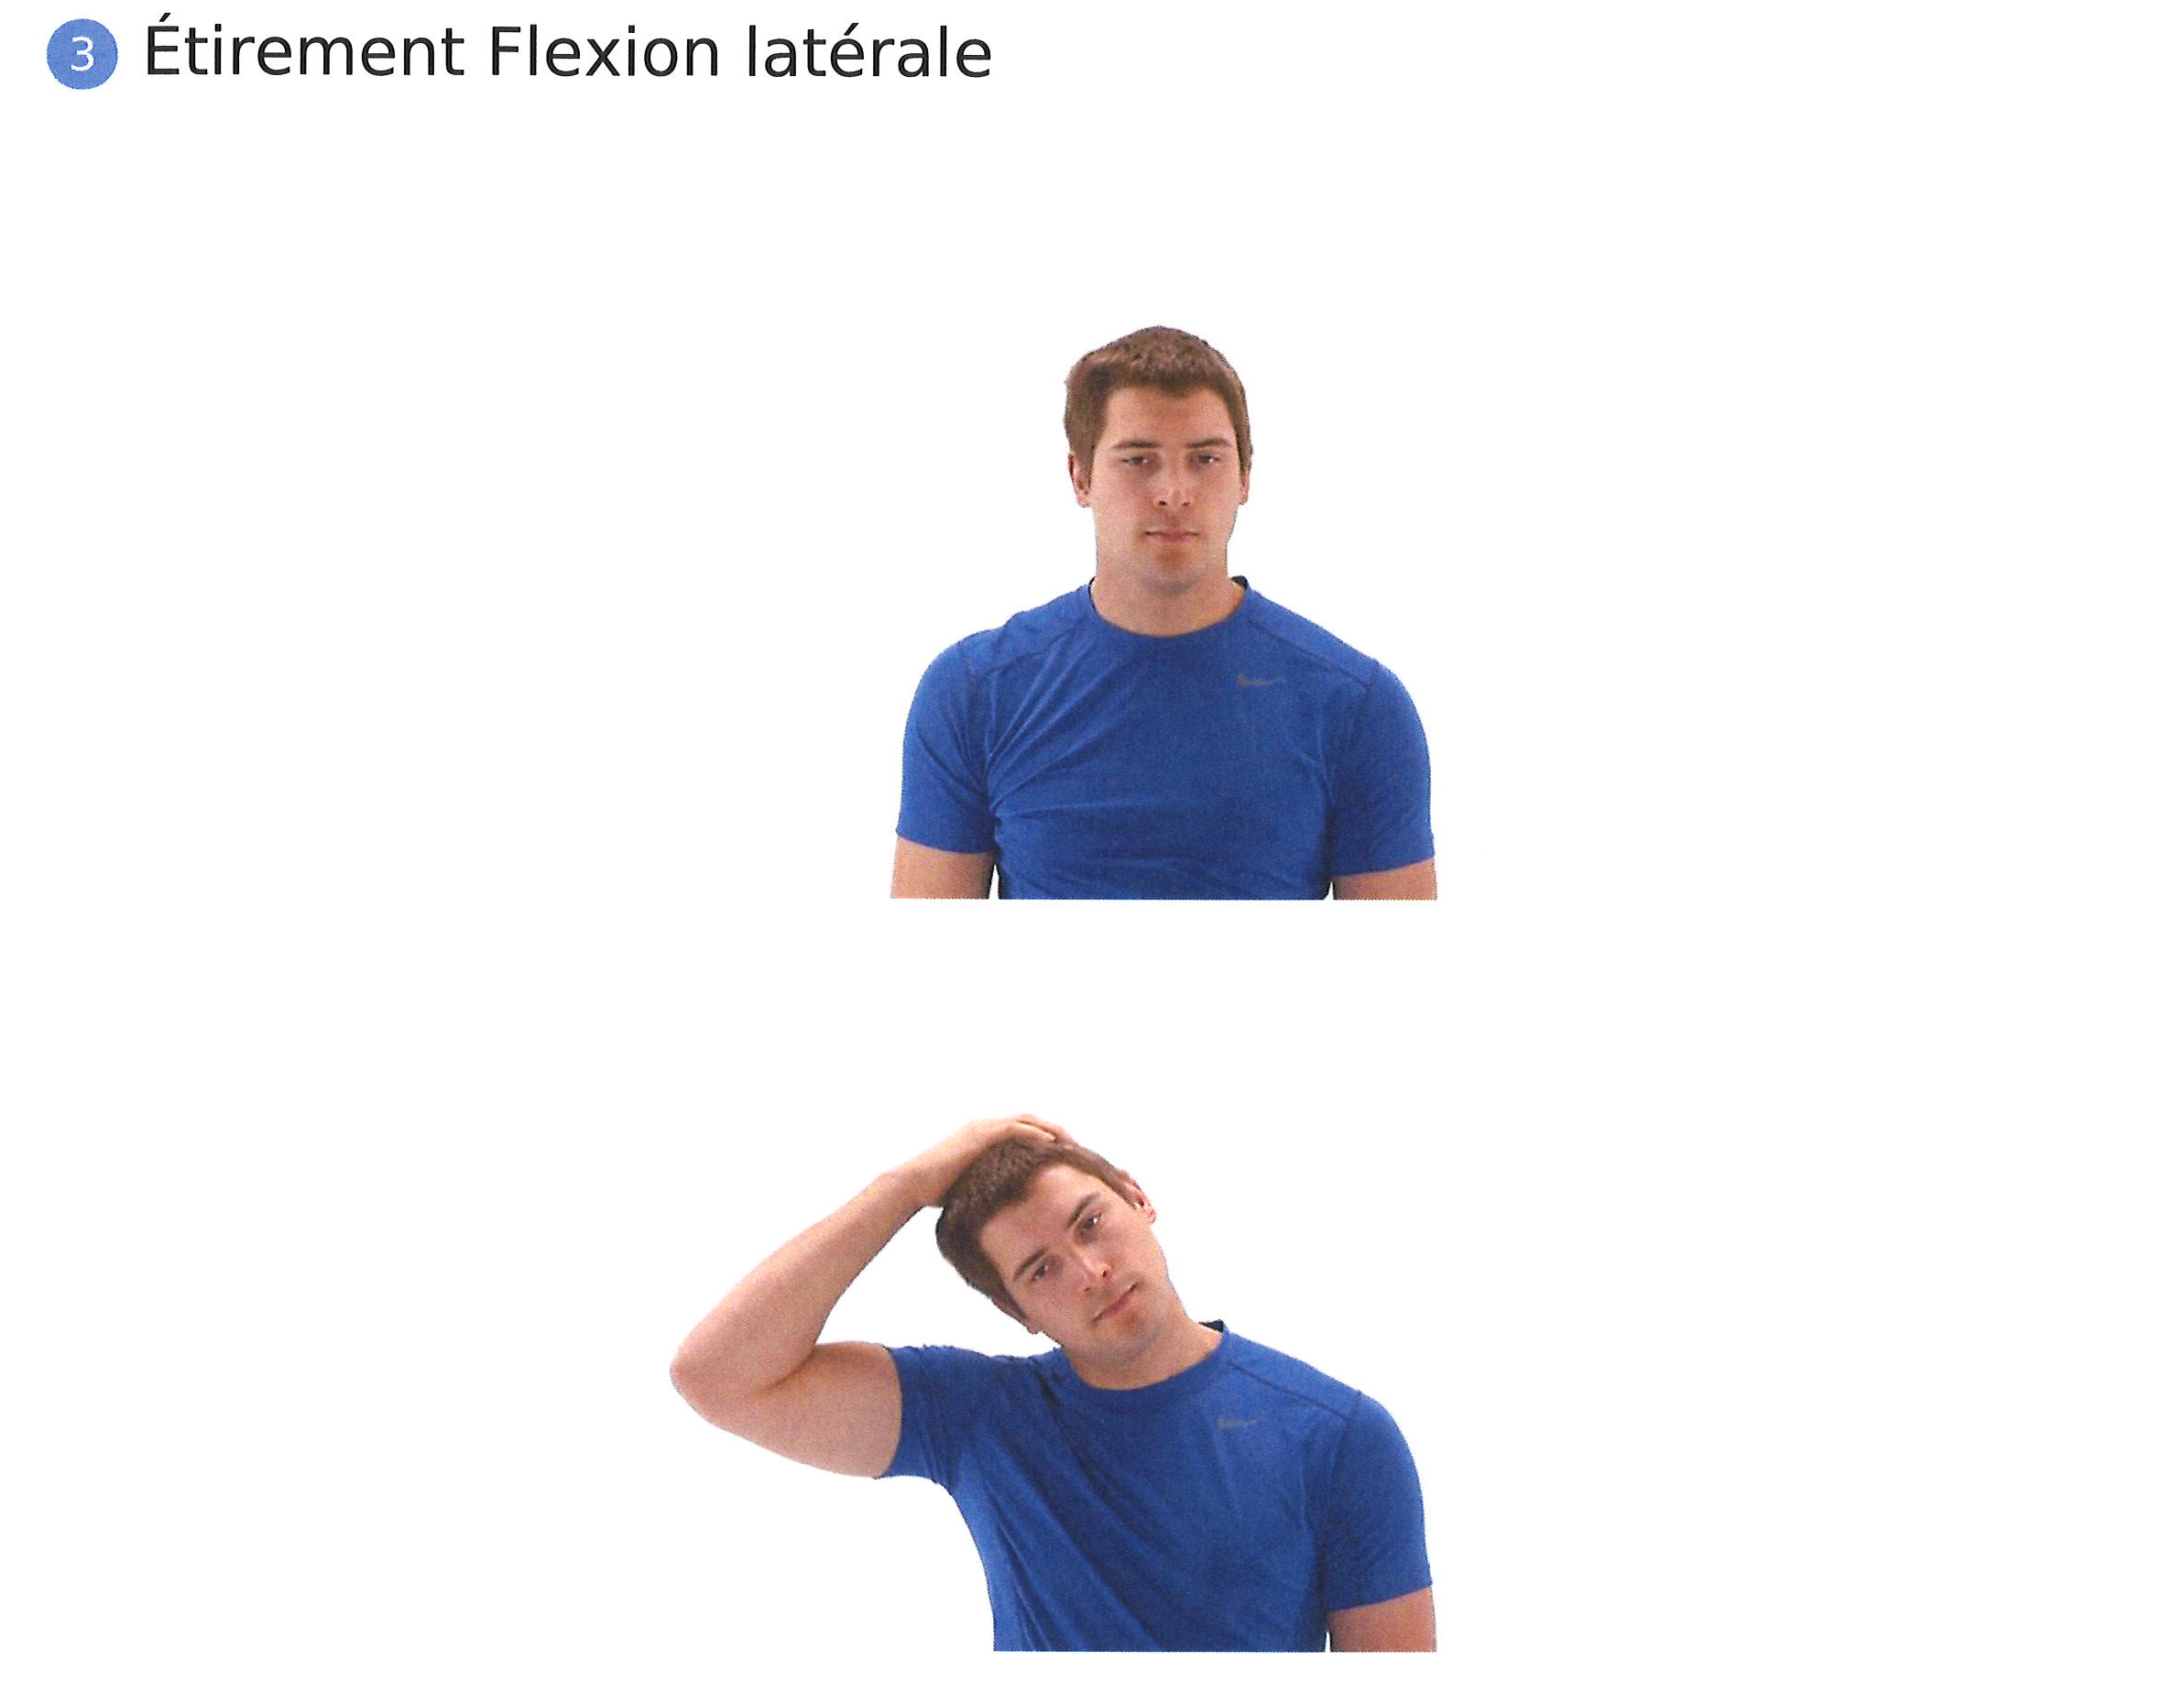 physio exercice hernie discale cervicale etirement flexion laterale